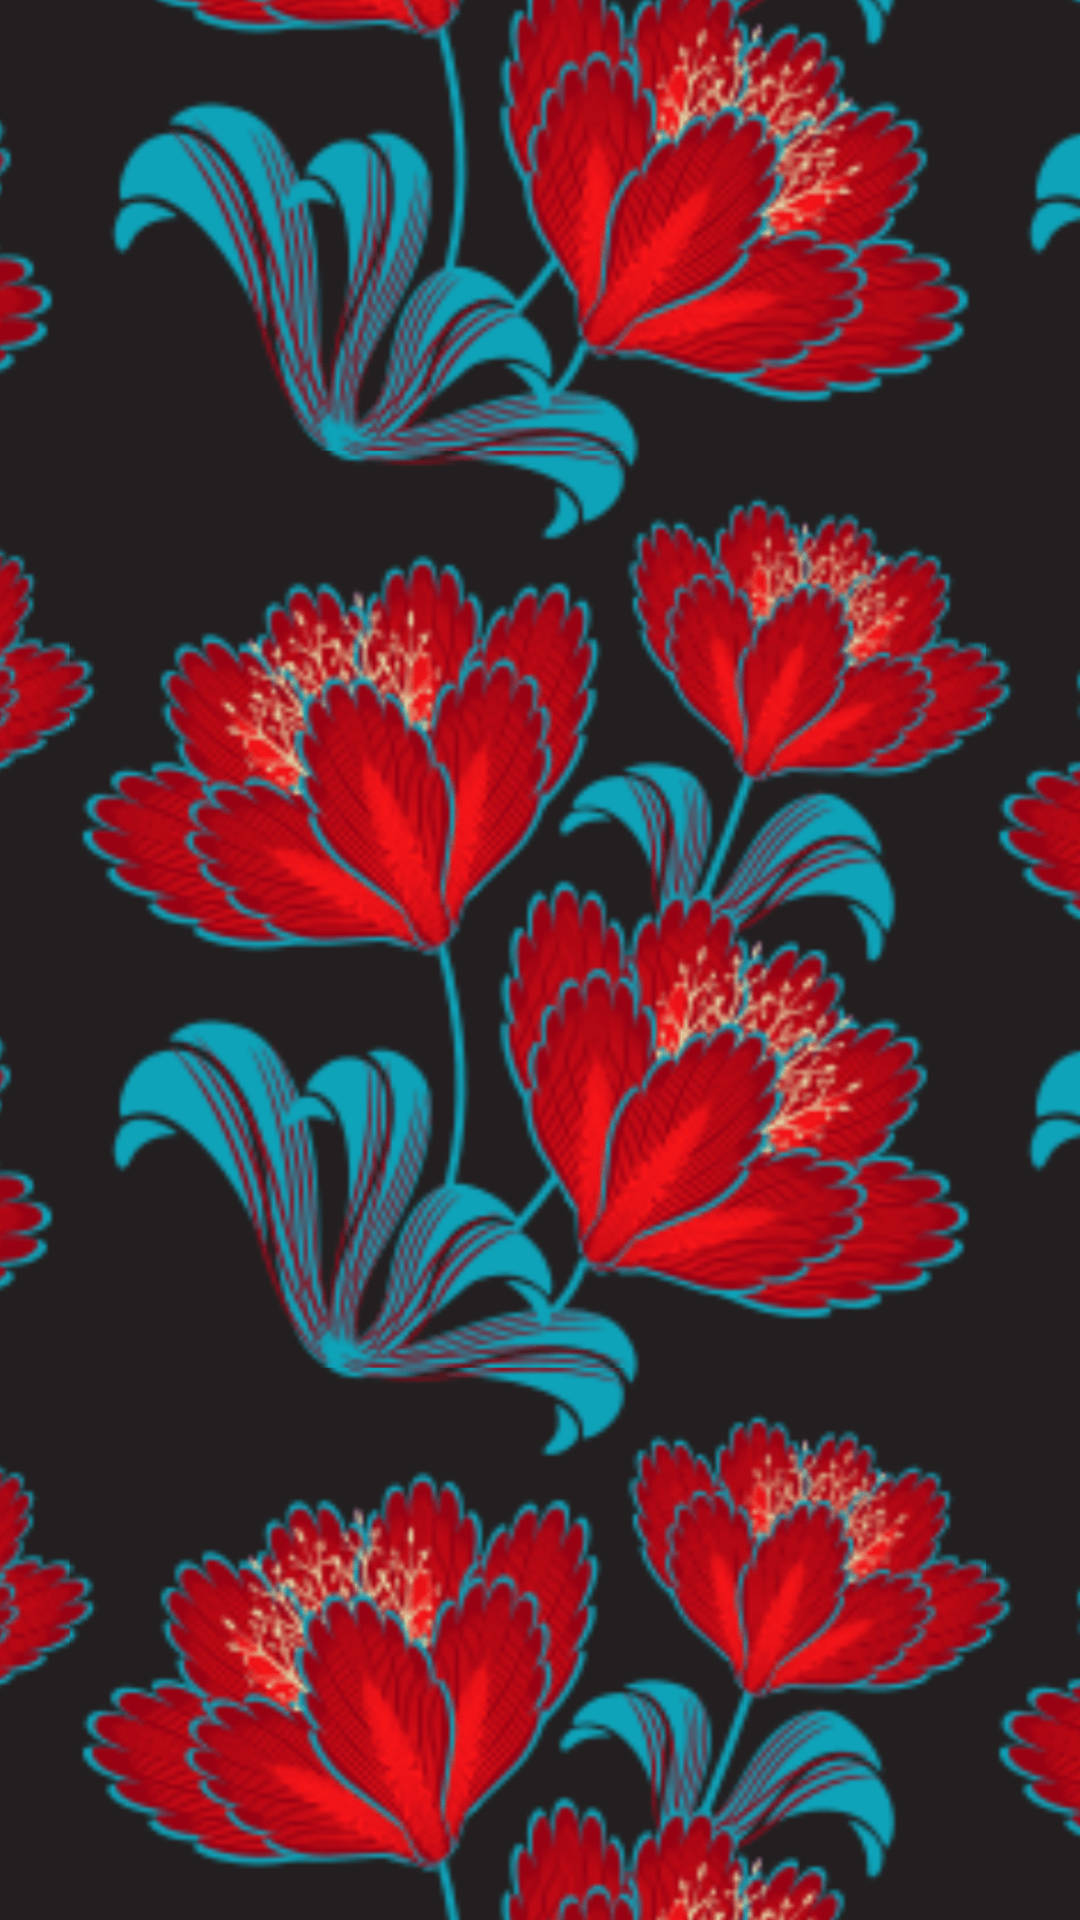 Floral Iphone Stylised Red Flower Background